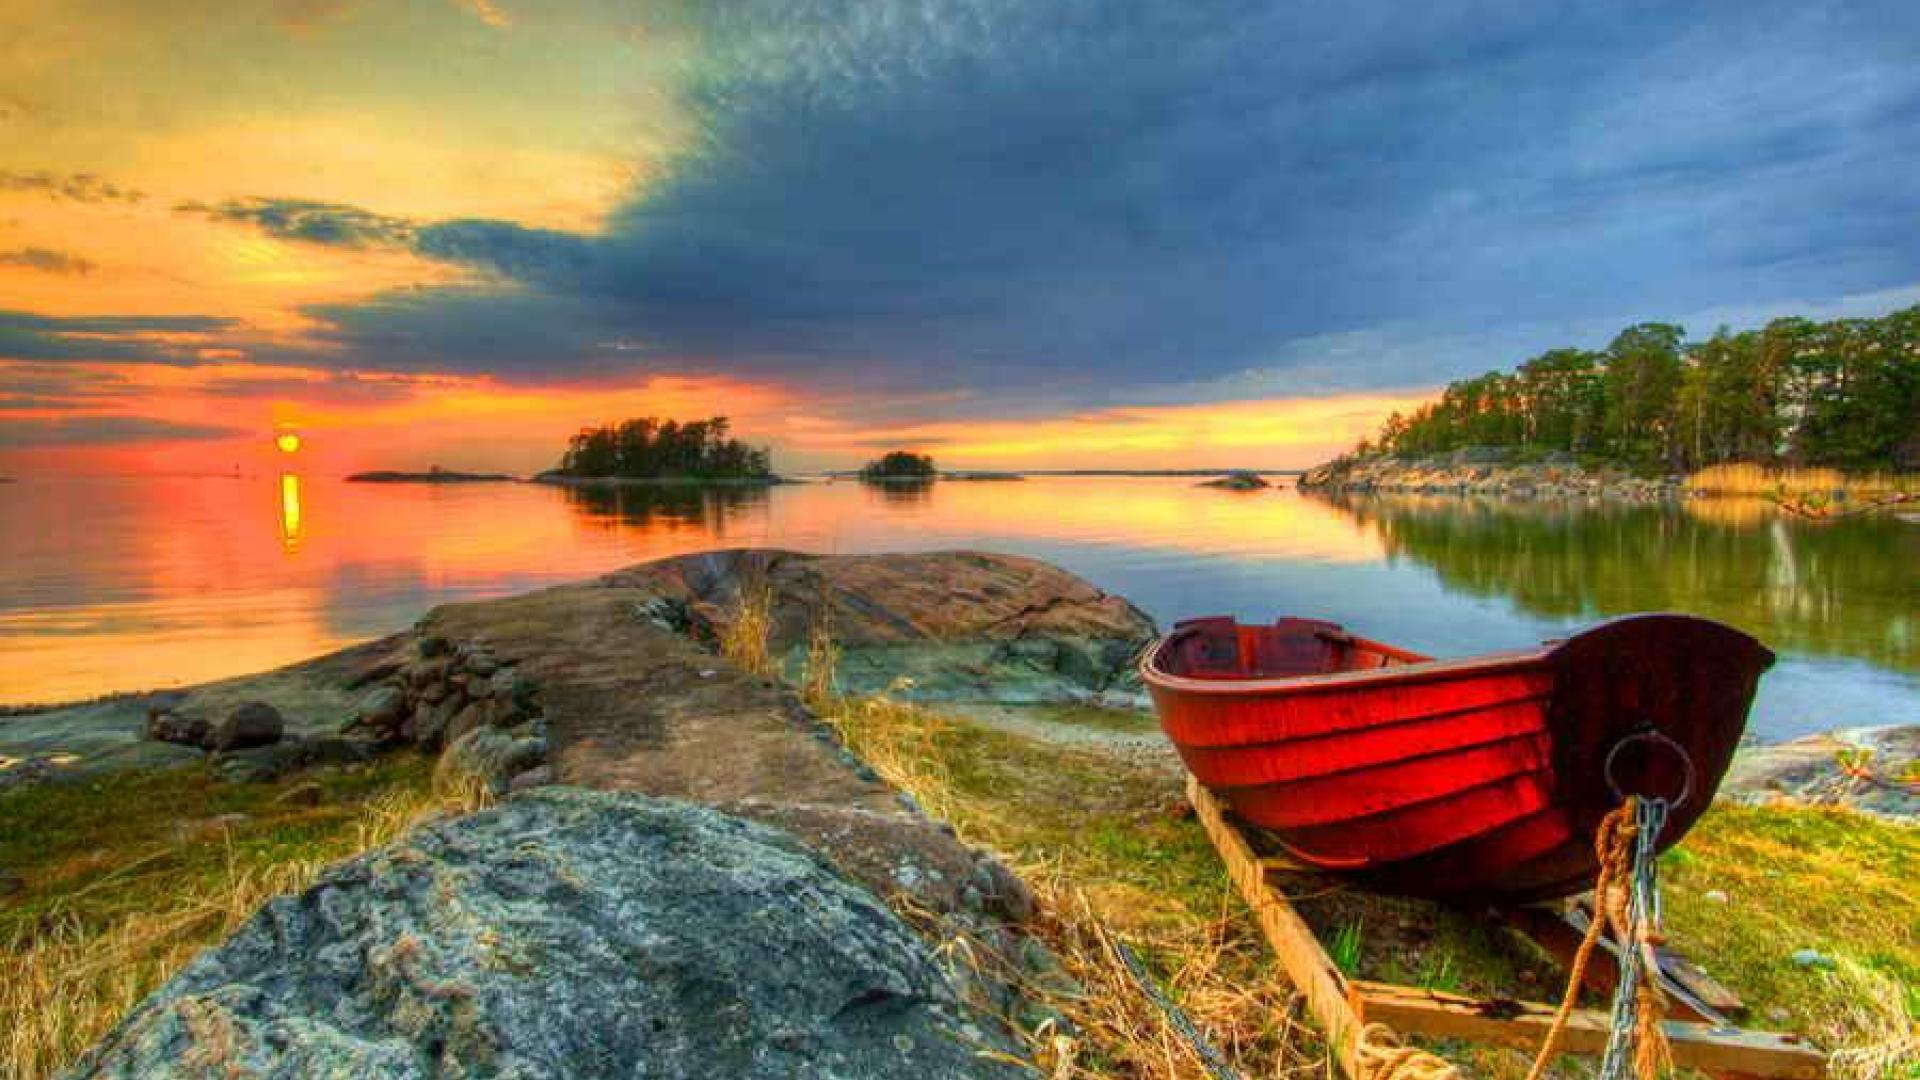 Lonely Boat At Sunrise Wallpaper HD